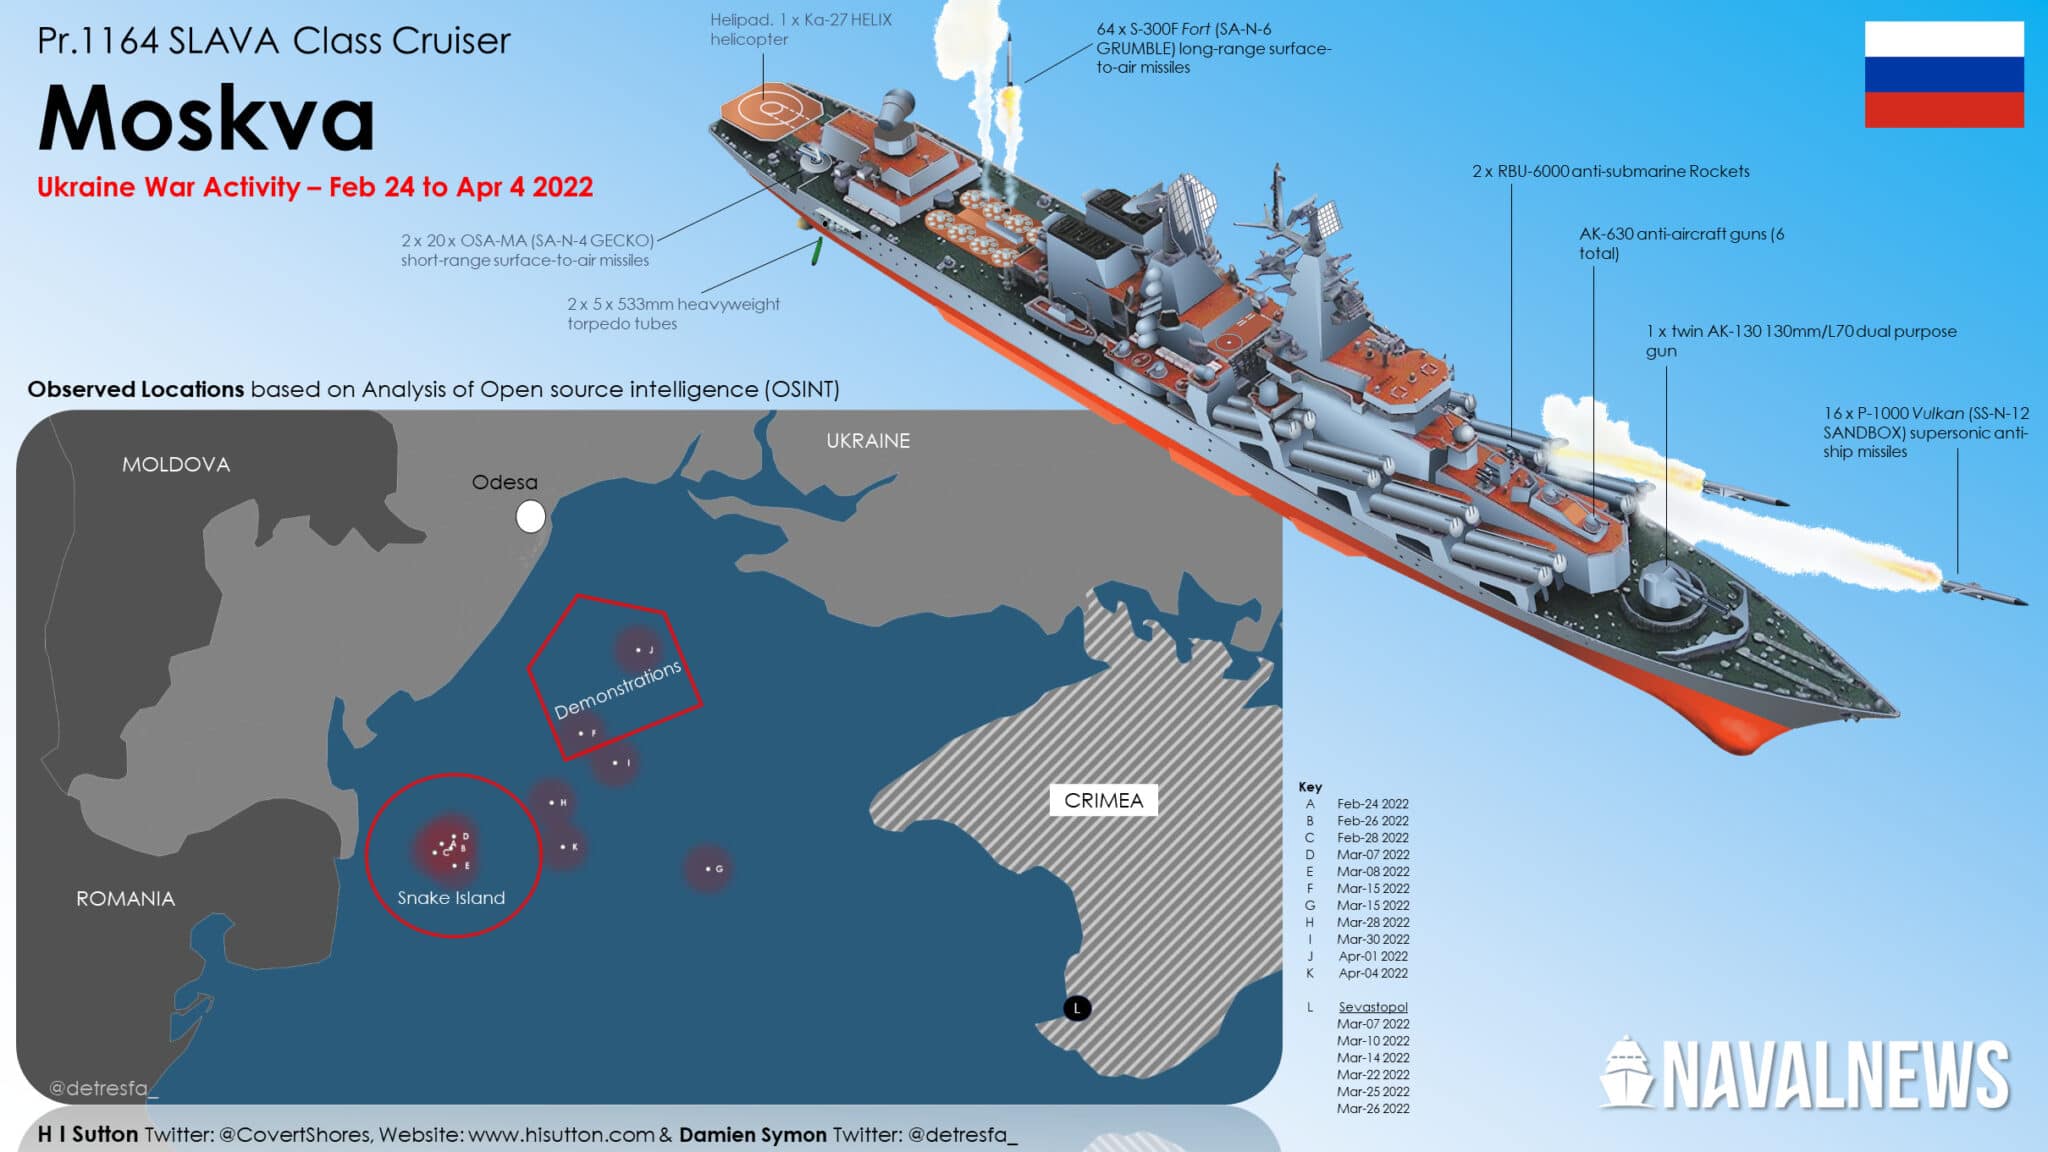 Missile cruiser Moskva and its activities in Russia’s 2022 invasion of Ukraine. Map: H.I. Sutton Twitter/CovertShores, Infographics: NavalNews.com ~